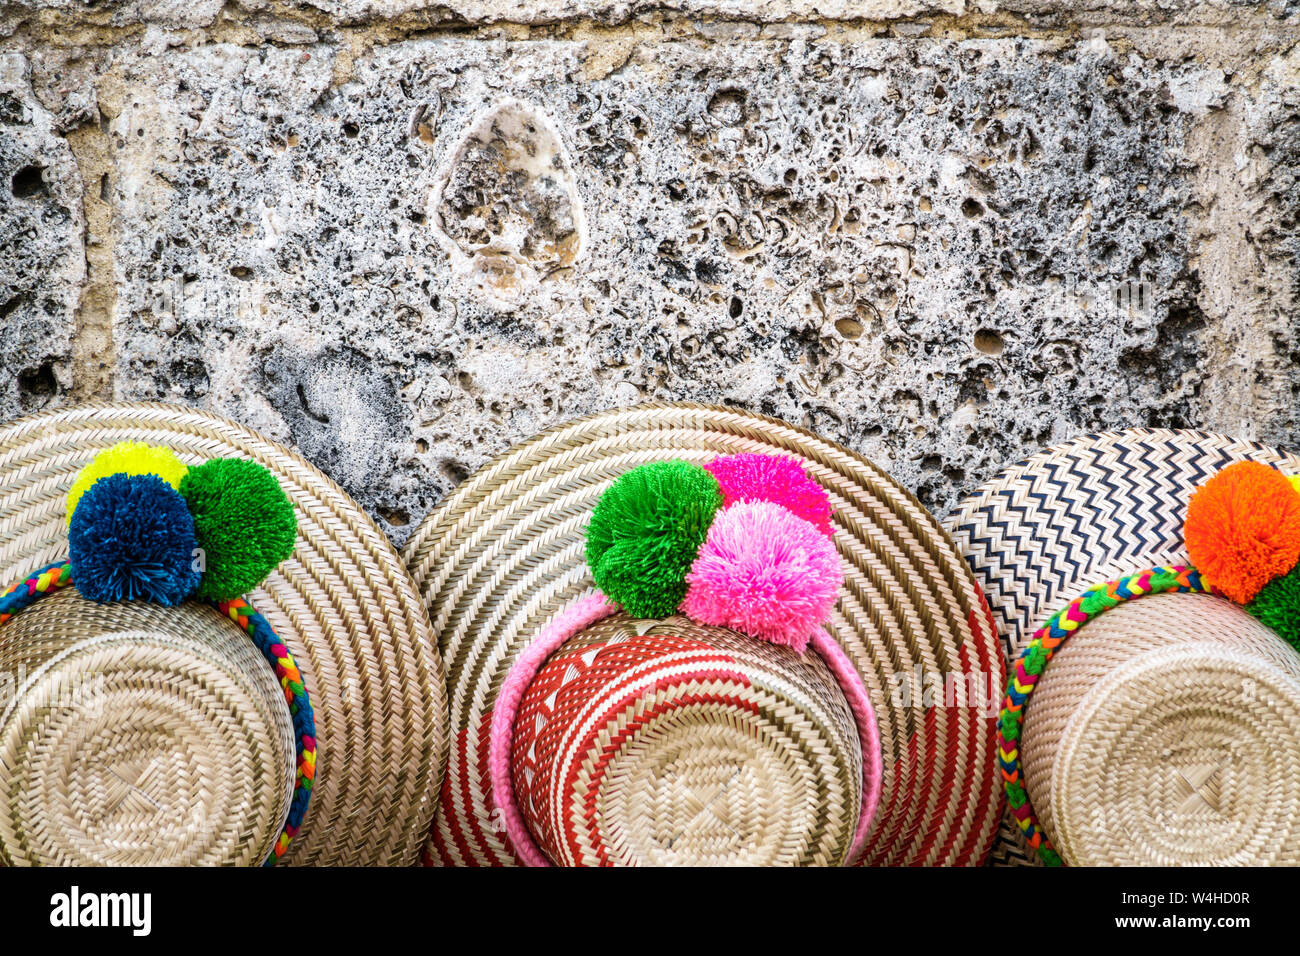 Colombia Cartagena Old Walled City Center centre street vendor display sale typical woven straw hats pom poms souvenirs sightseeing visitors tr Stock Photo